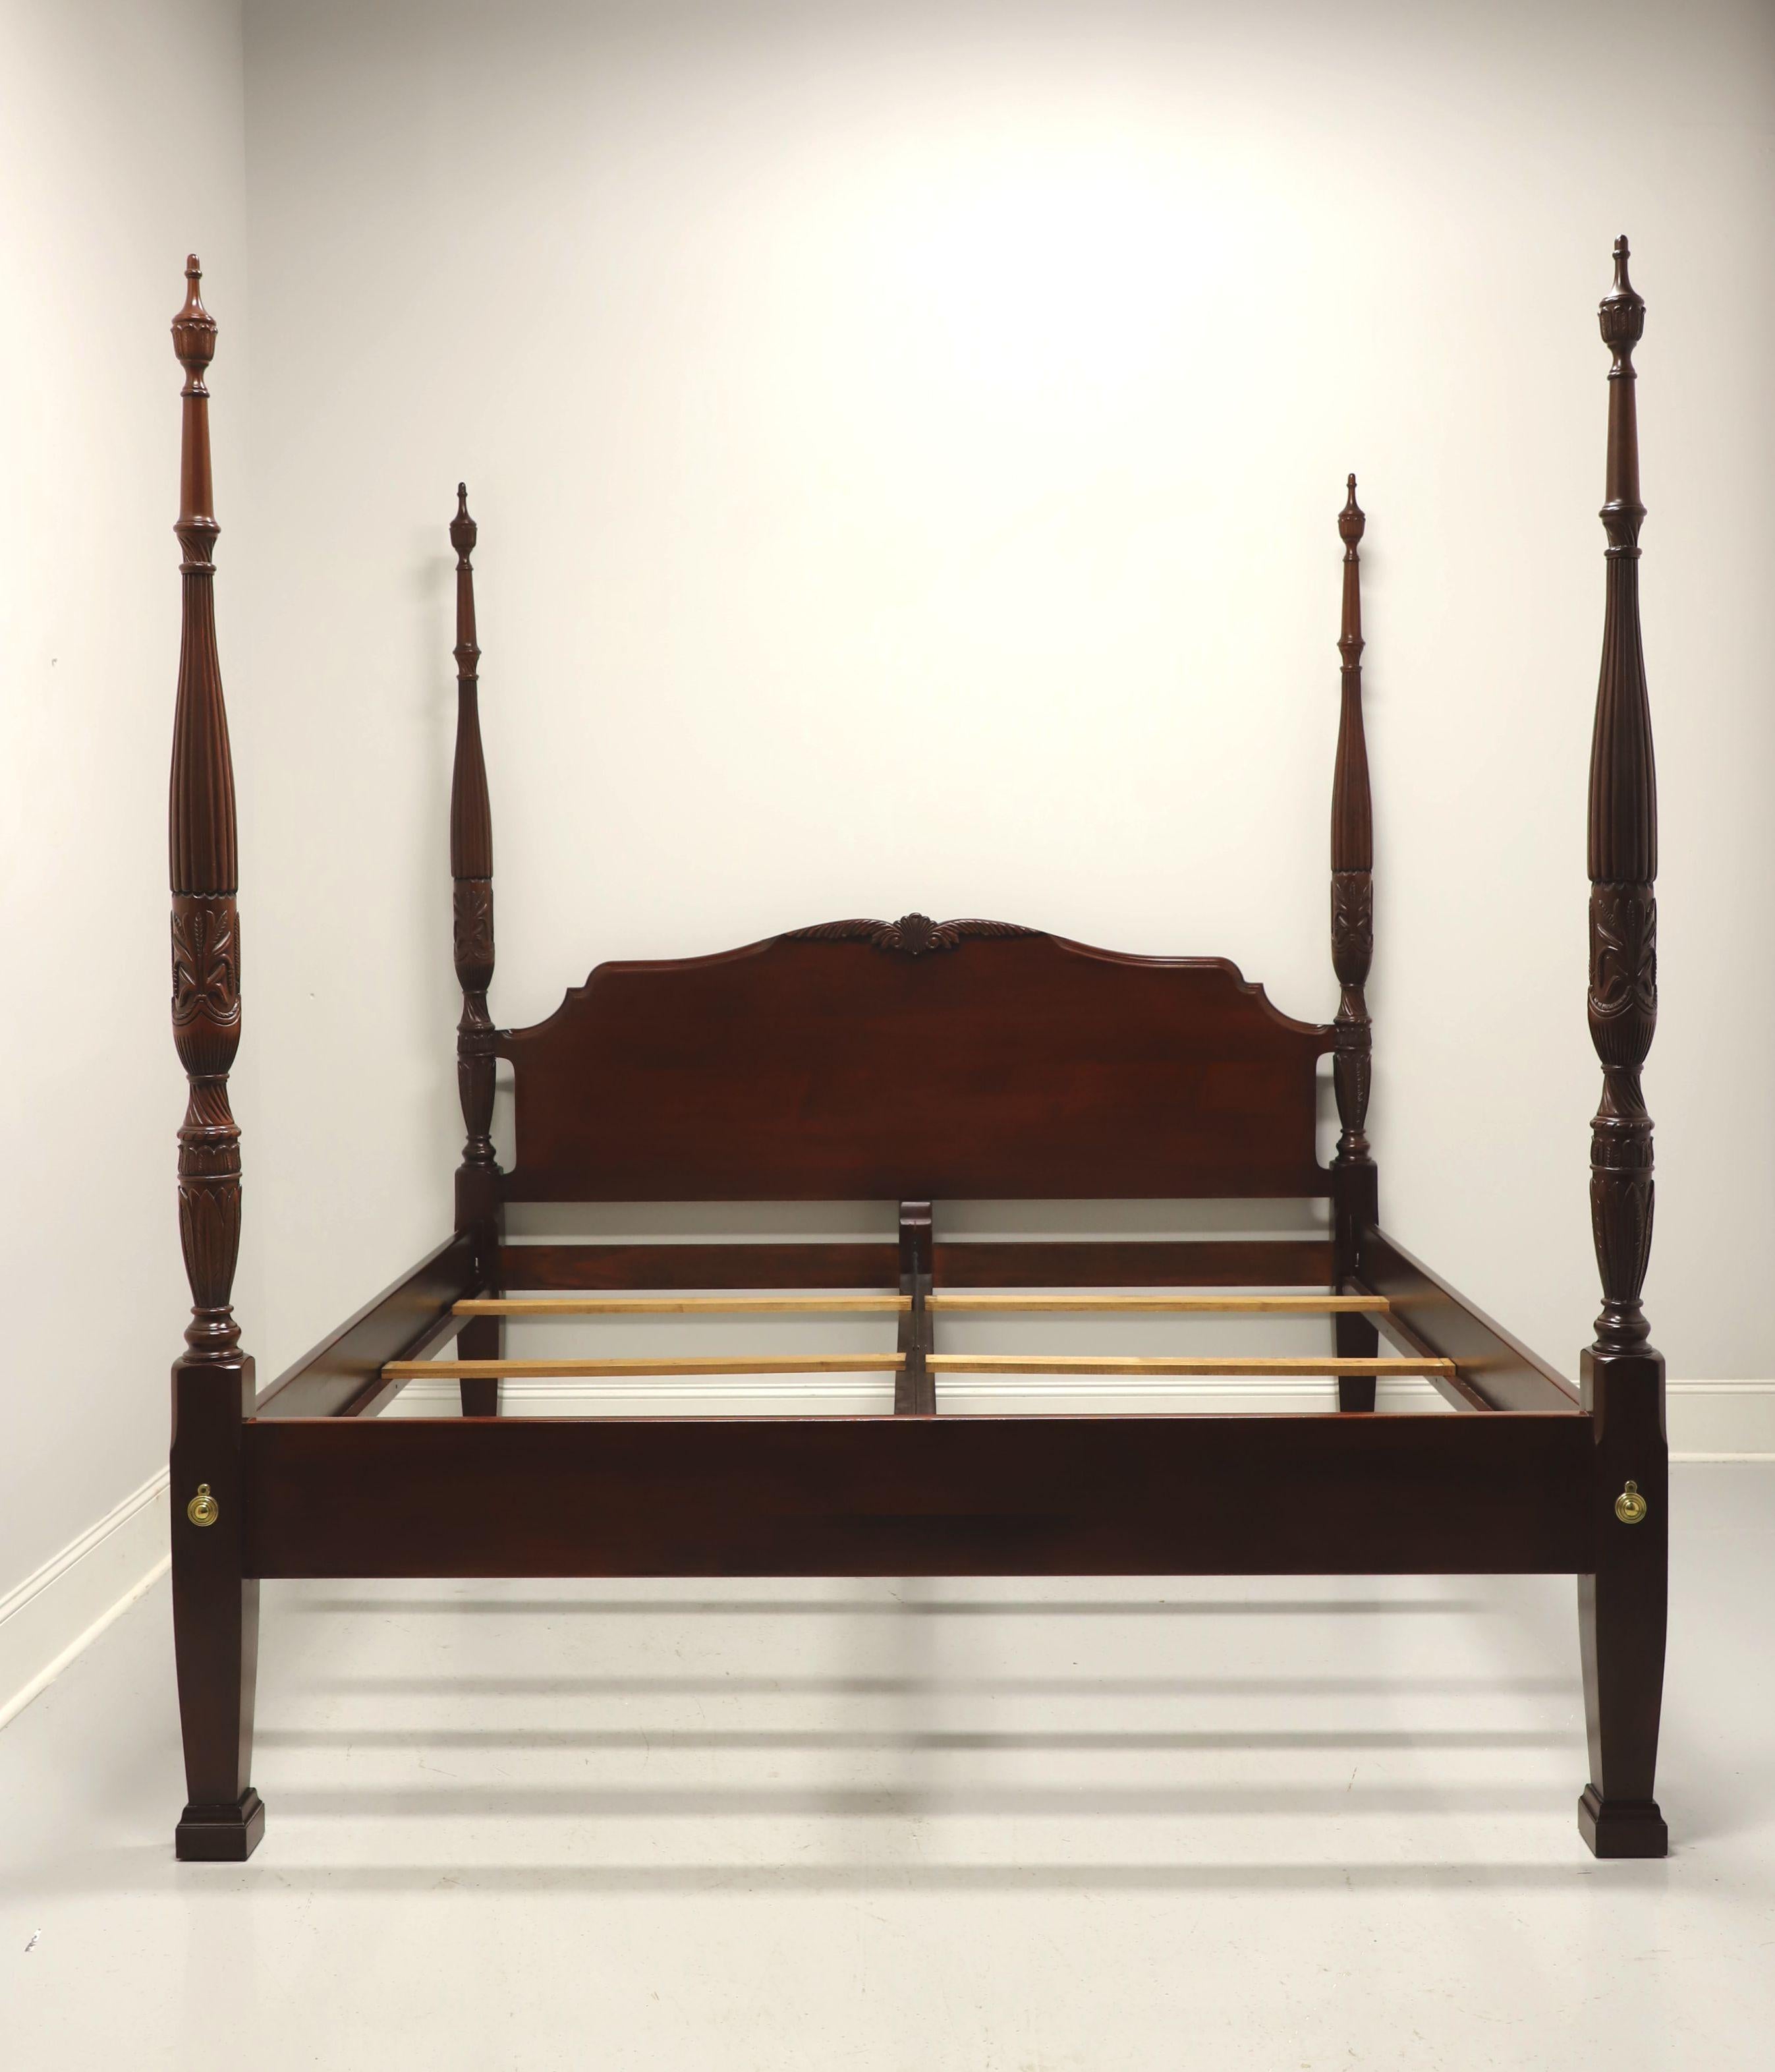 A Chippendale style king size rice carved poster bed by Link-Taylor. Solid heirloom mahogany with decoratively carved arched headboard, four rice carved posts with finials, brass hardware, bolt held side rails with wood bracers, center metal rail